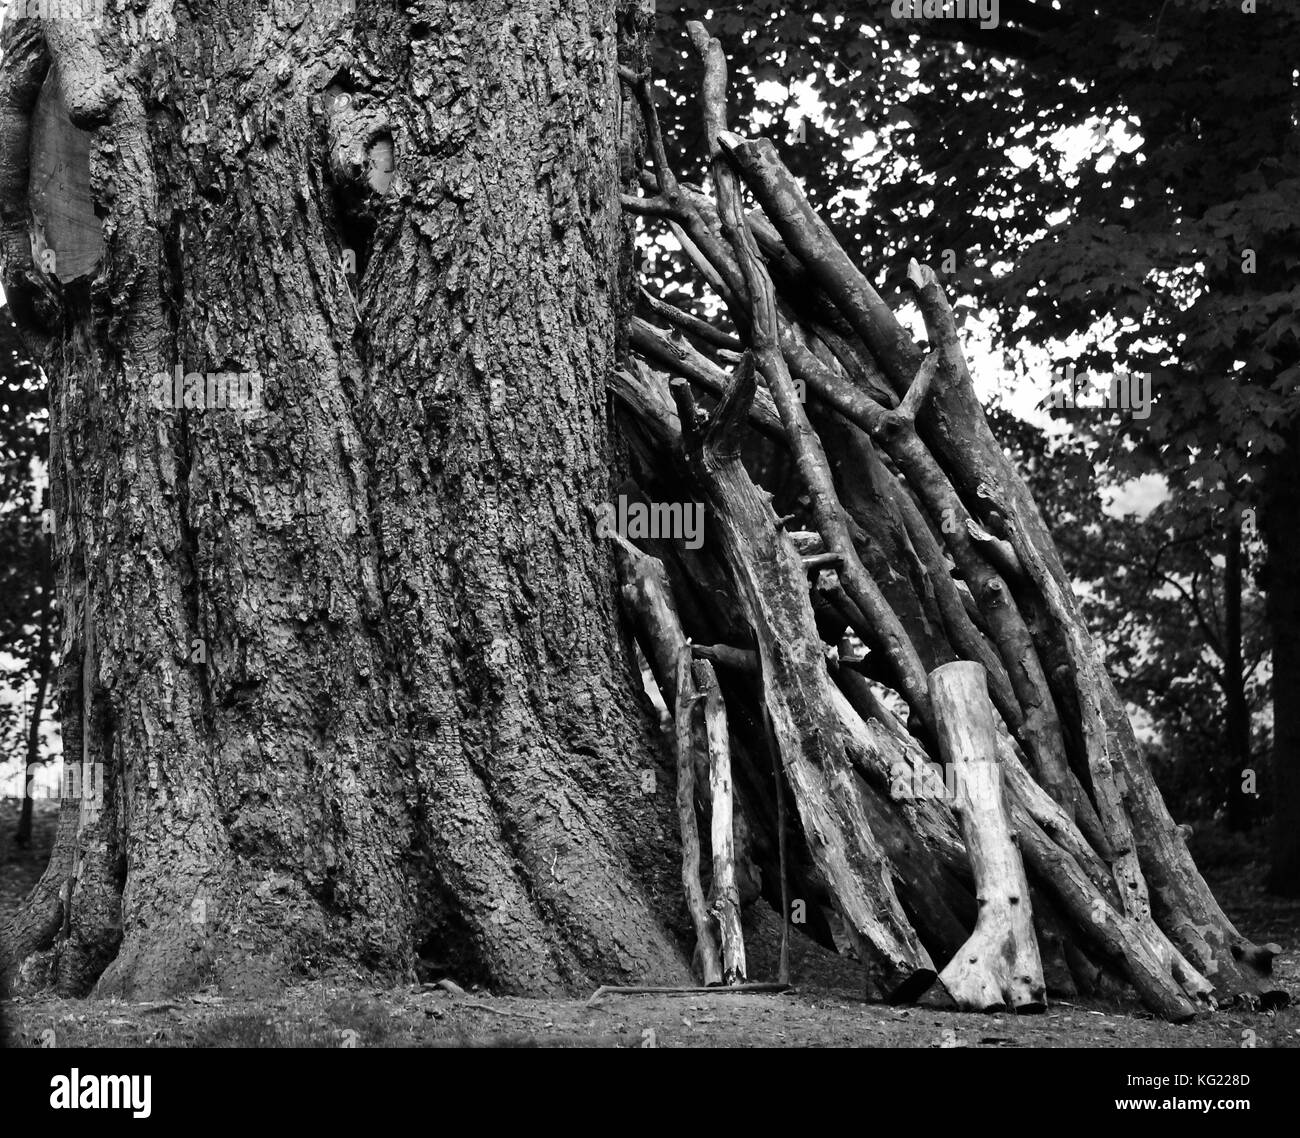 big old tree lean on me black and white image Stock Photo